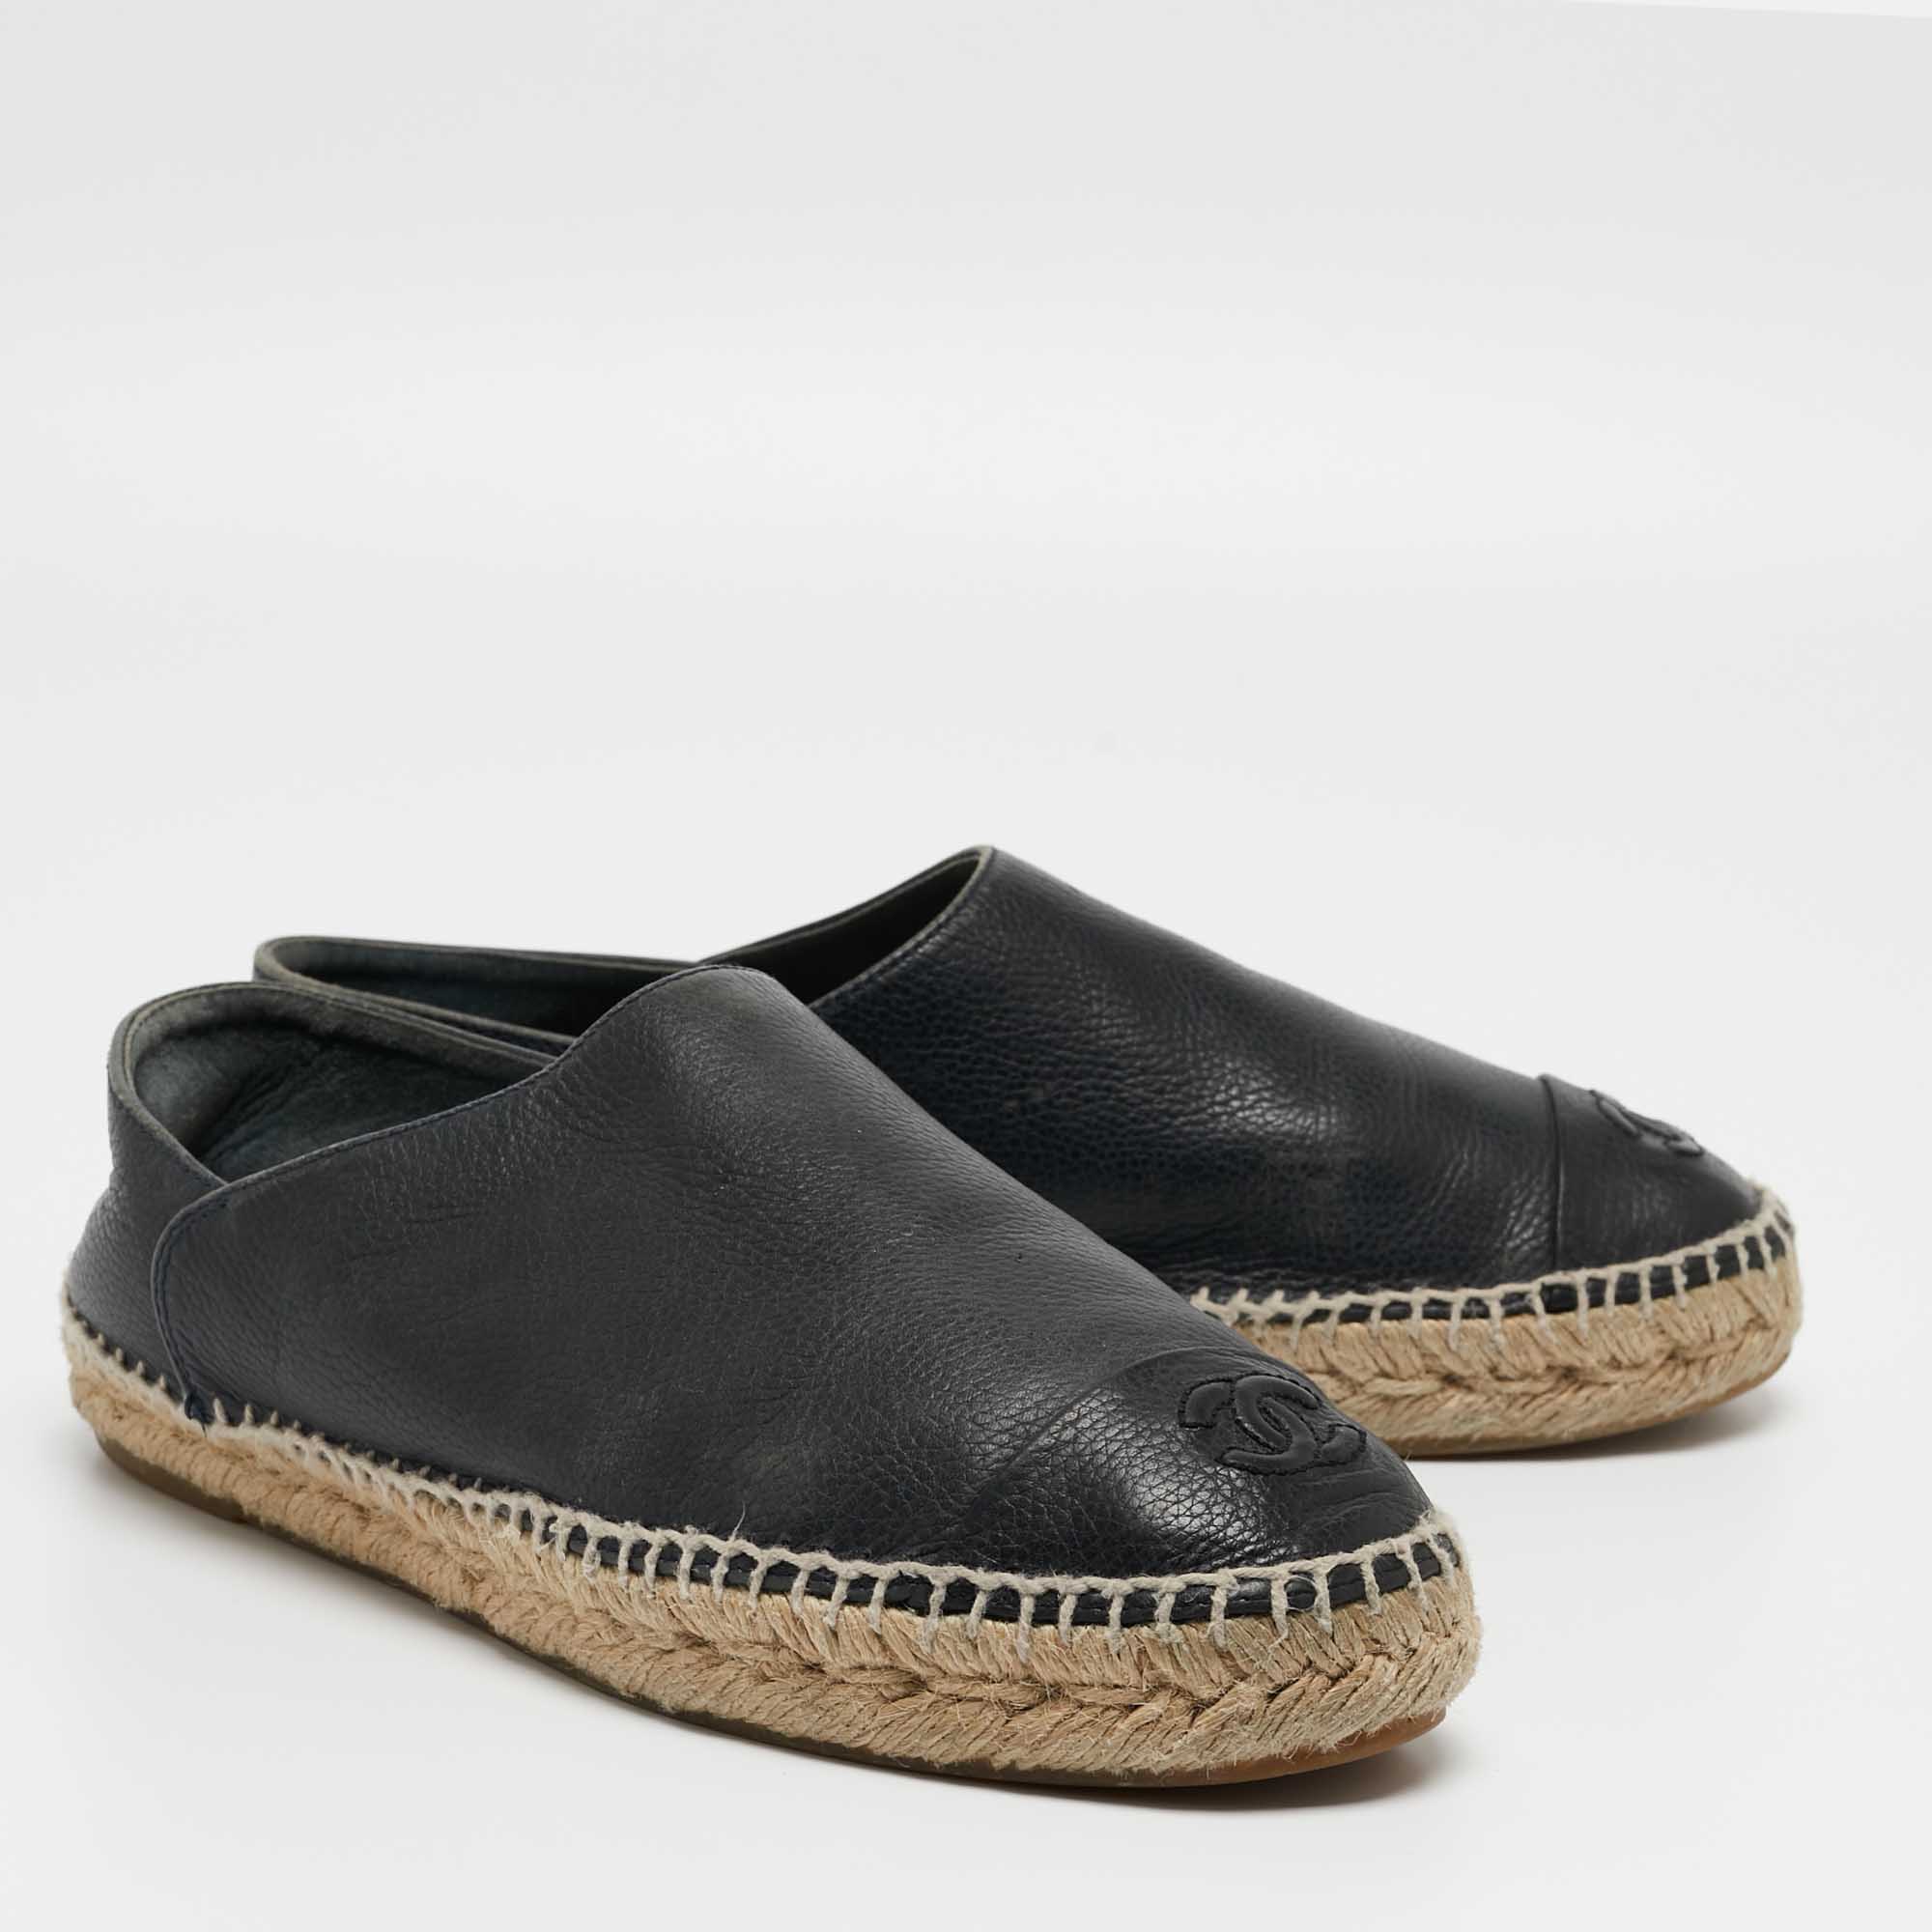 Chanel Navy Blue Leather Espadrille Flats Size 39